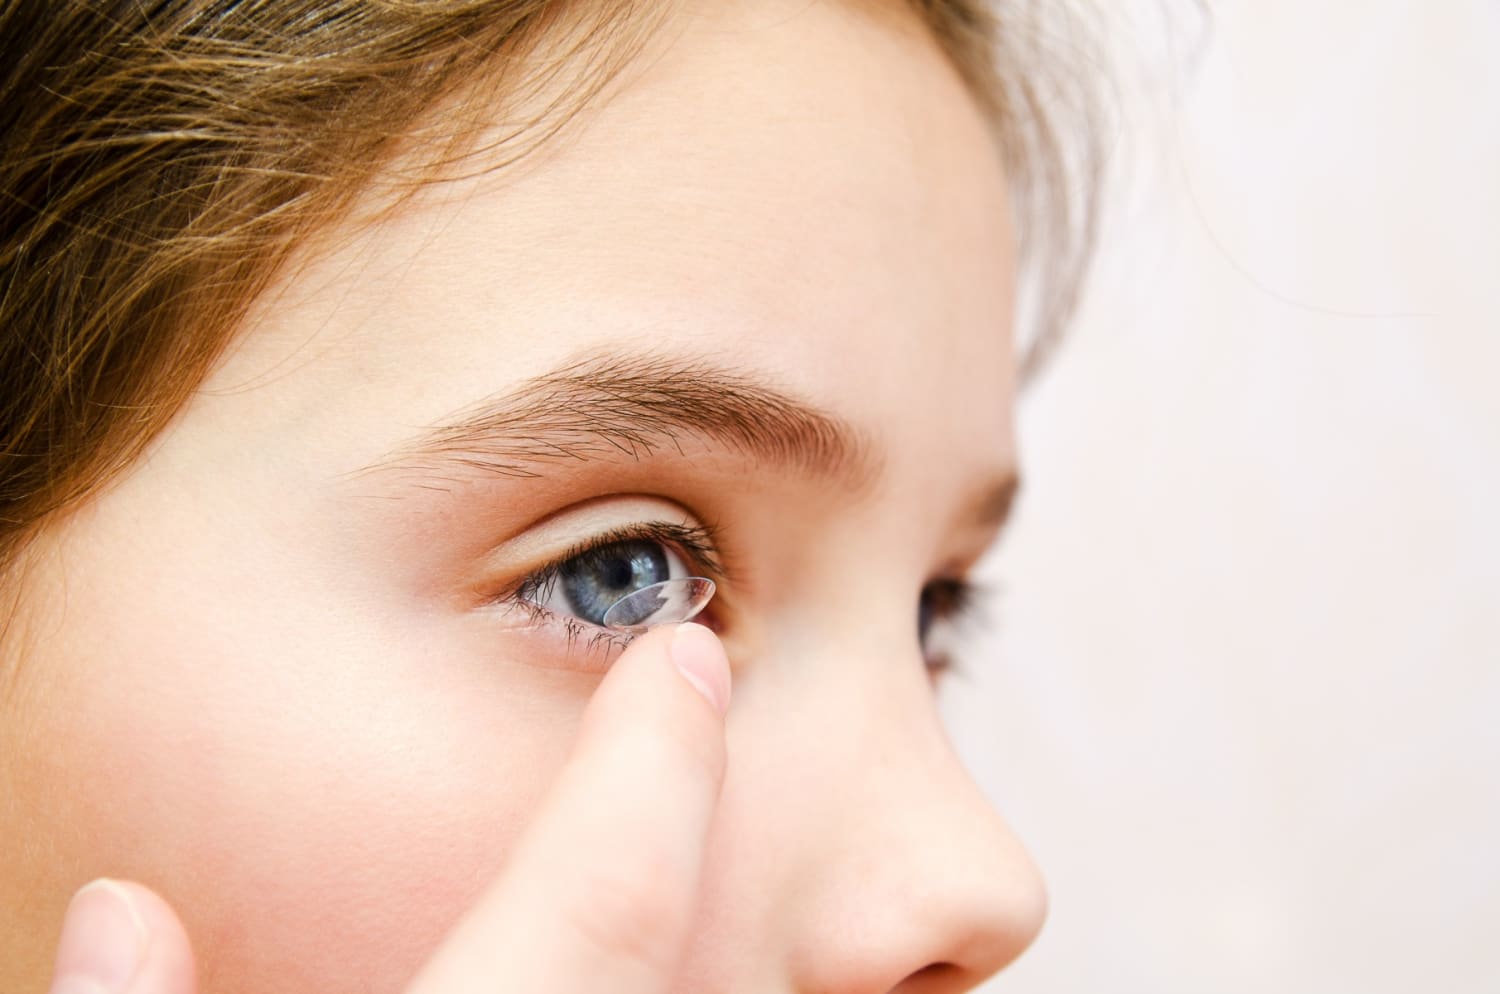 Young nearsighted kids benefit from bifocal contact lenses, study shows